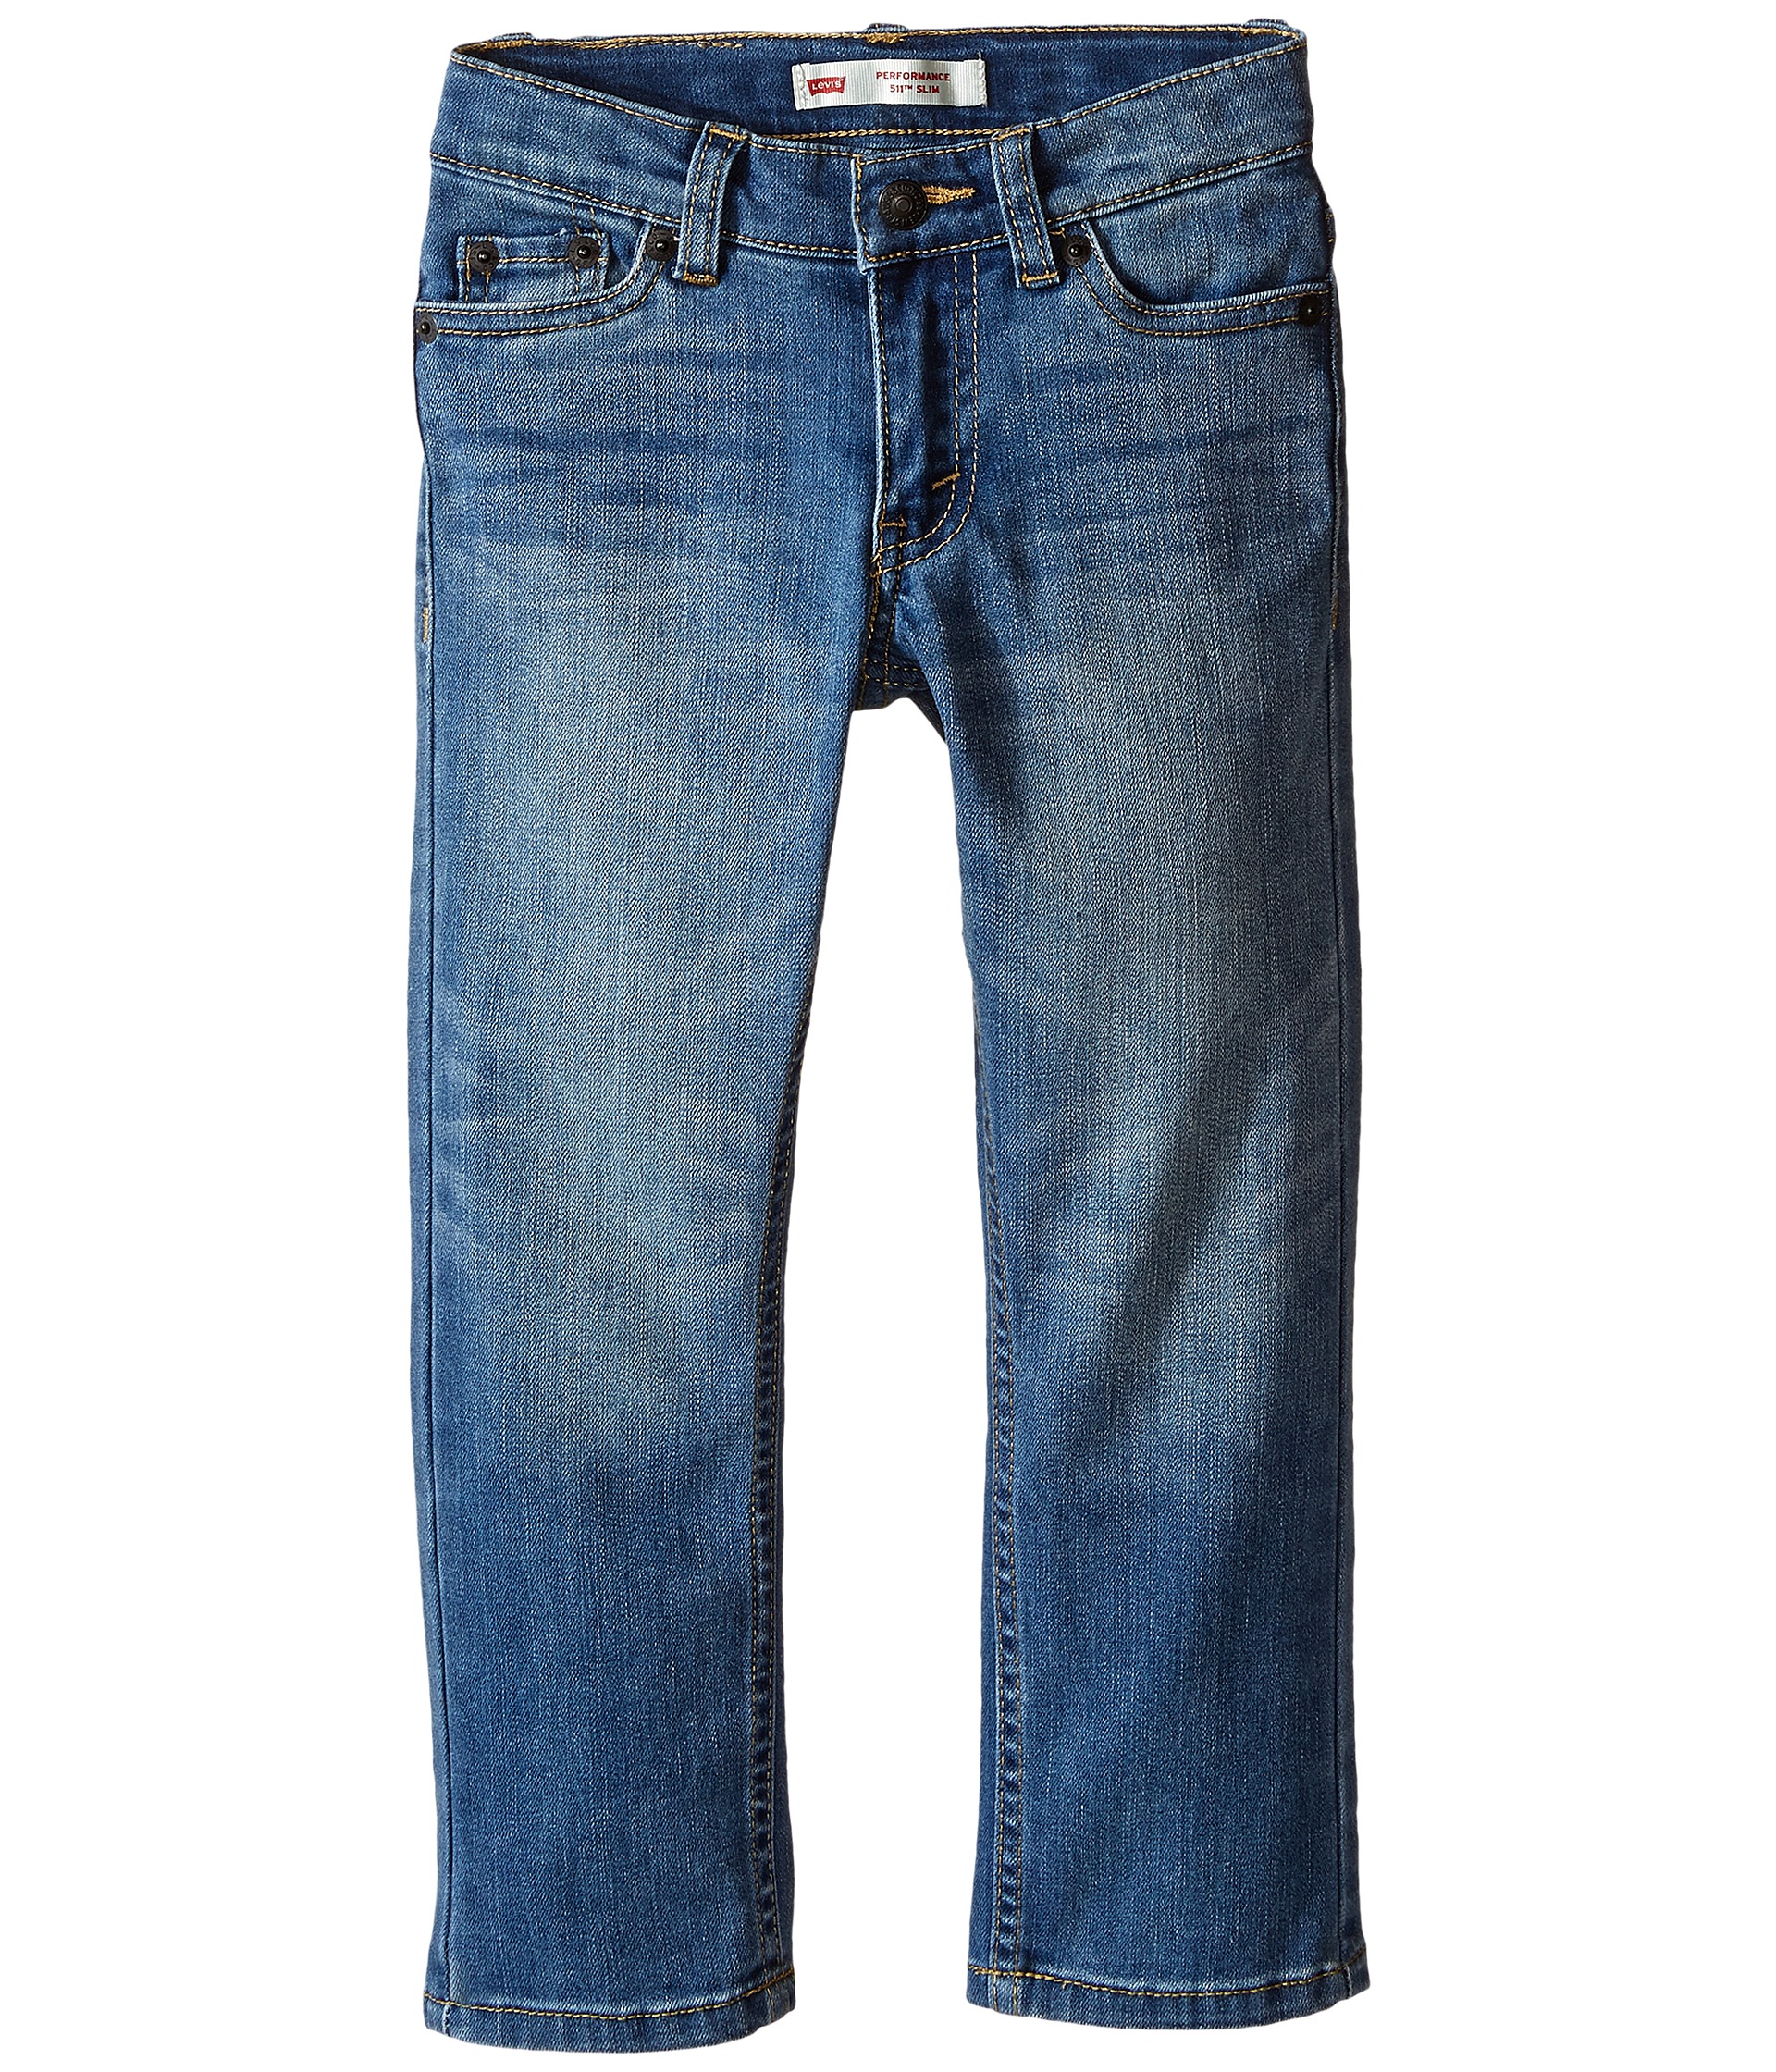 Levi's® Kids 511 Performance Jeans (Toddler) at Zappos.com